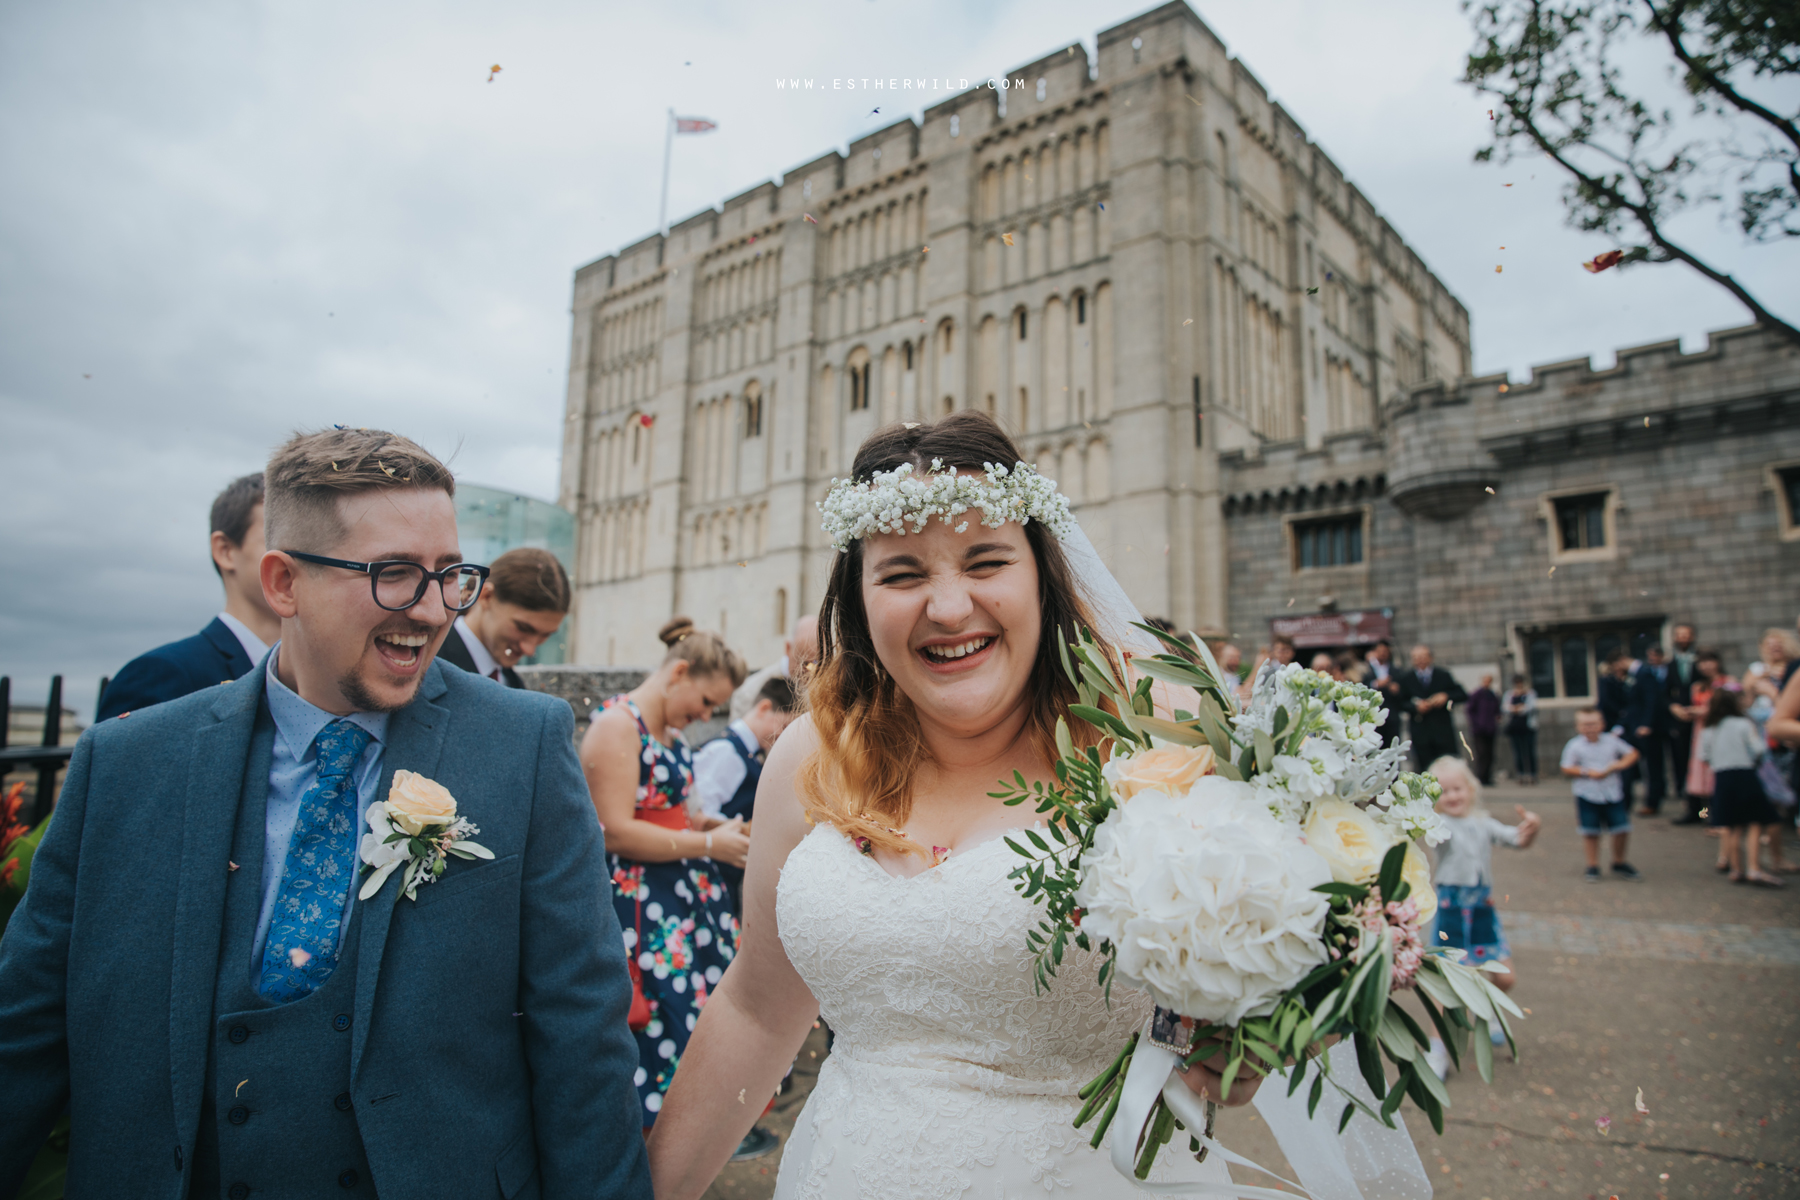 Norwich_Castle_Arcade_Grosvenor_Chip_Birdcage_Cathedral_Cloisters_Refectory_Wedding_Photography_Esther_Wild_Photographer_Norfolk_Kings_Lynn_3R8A1218.jpg